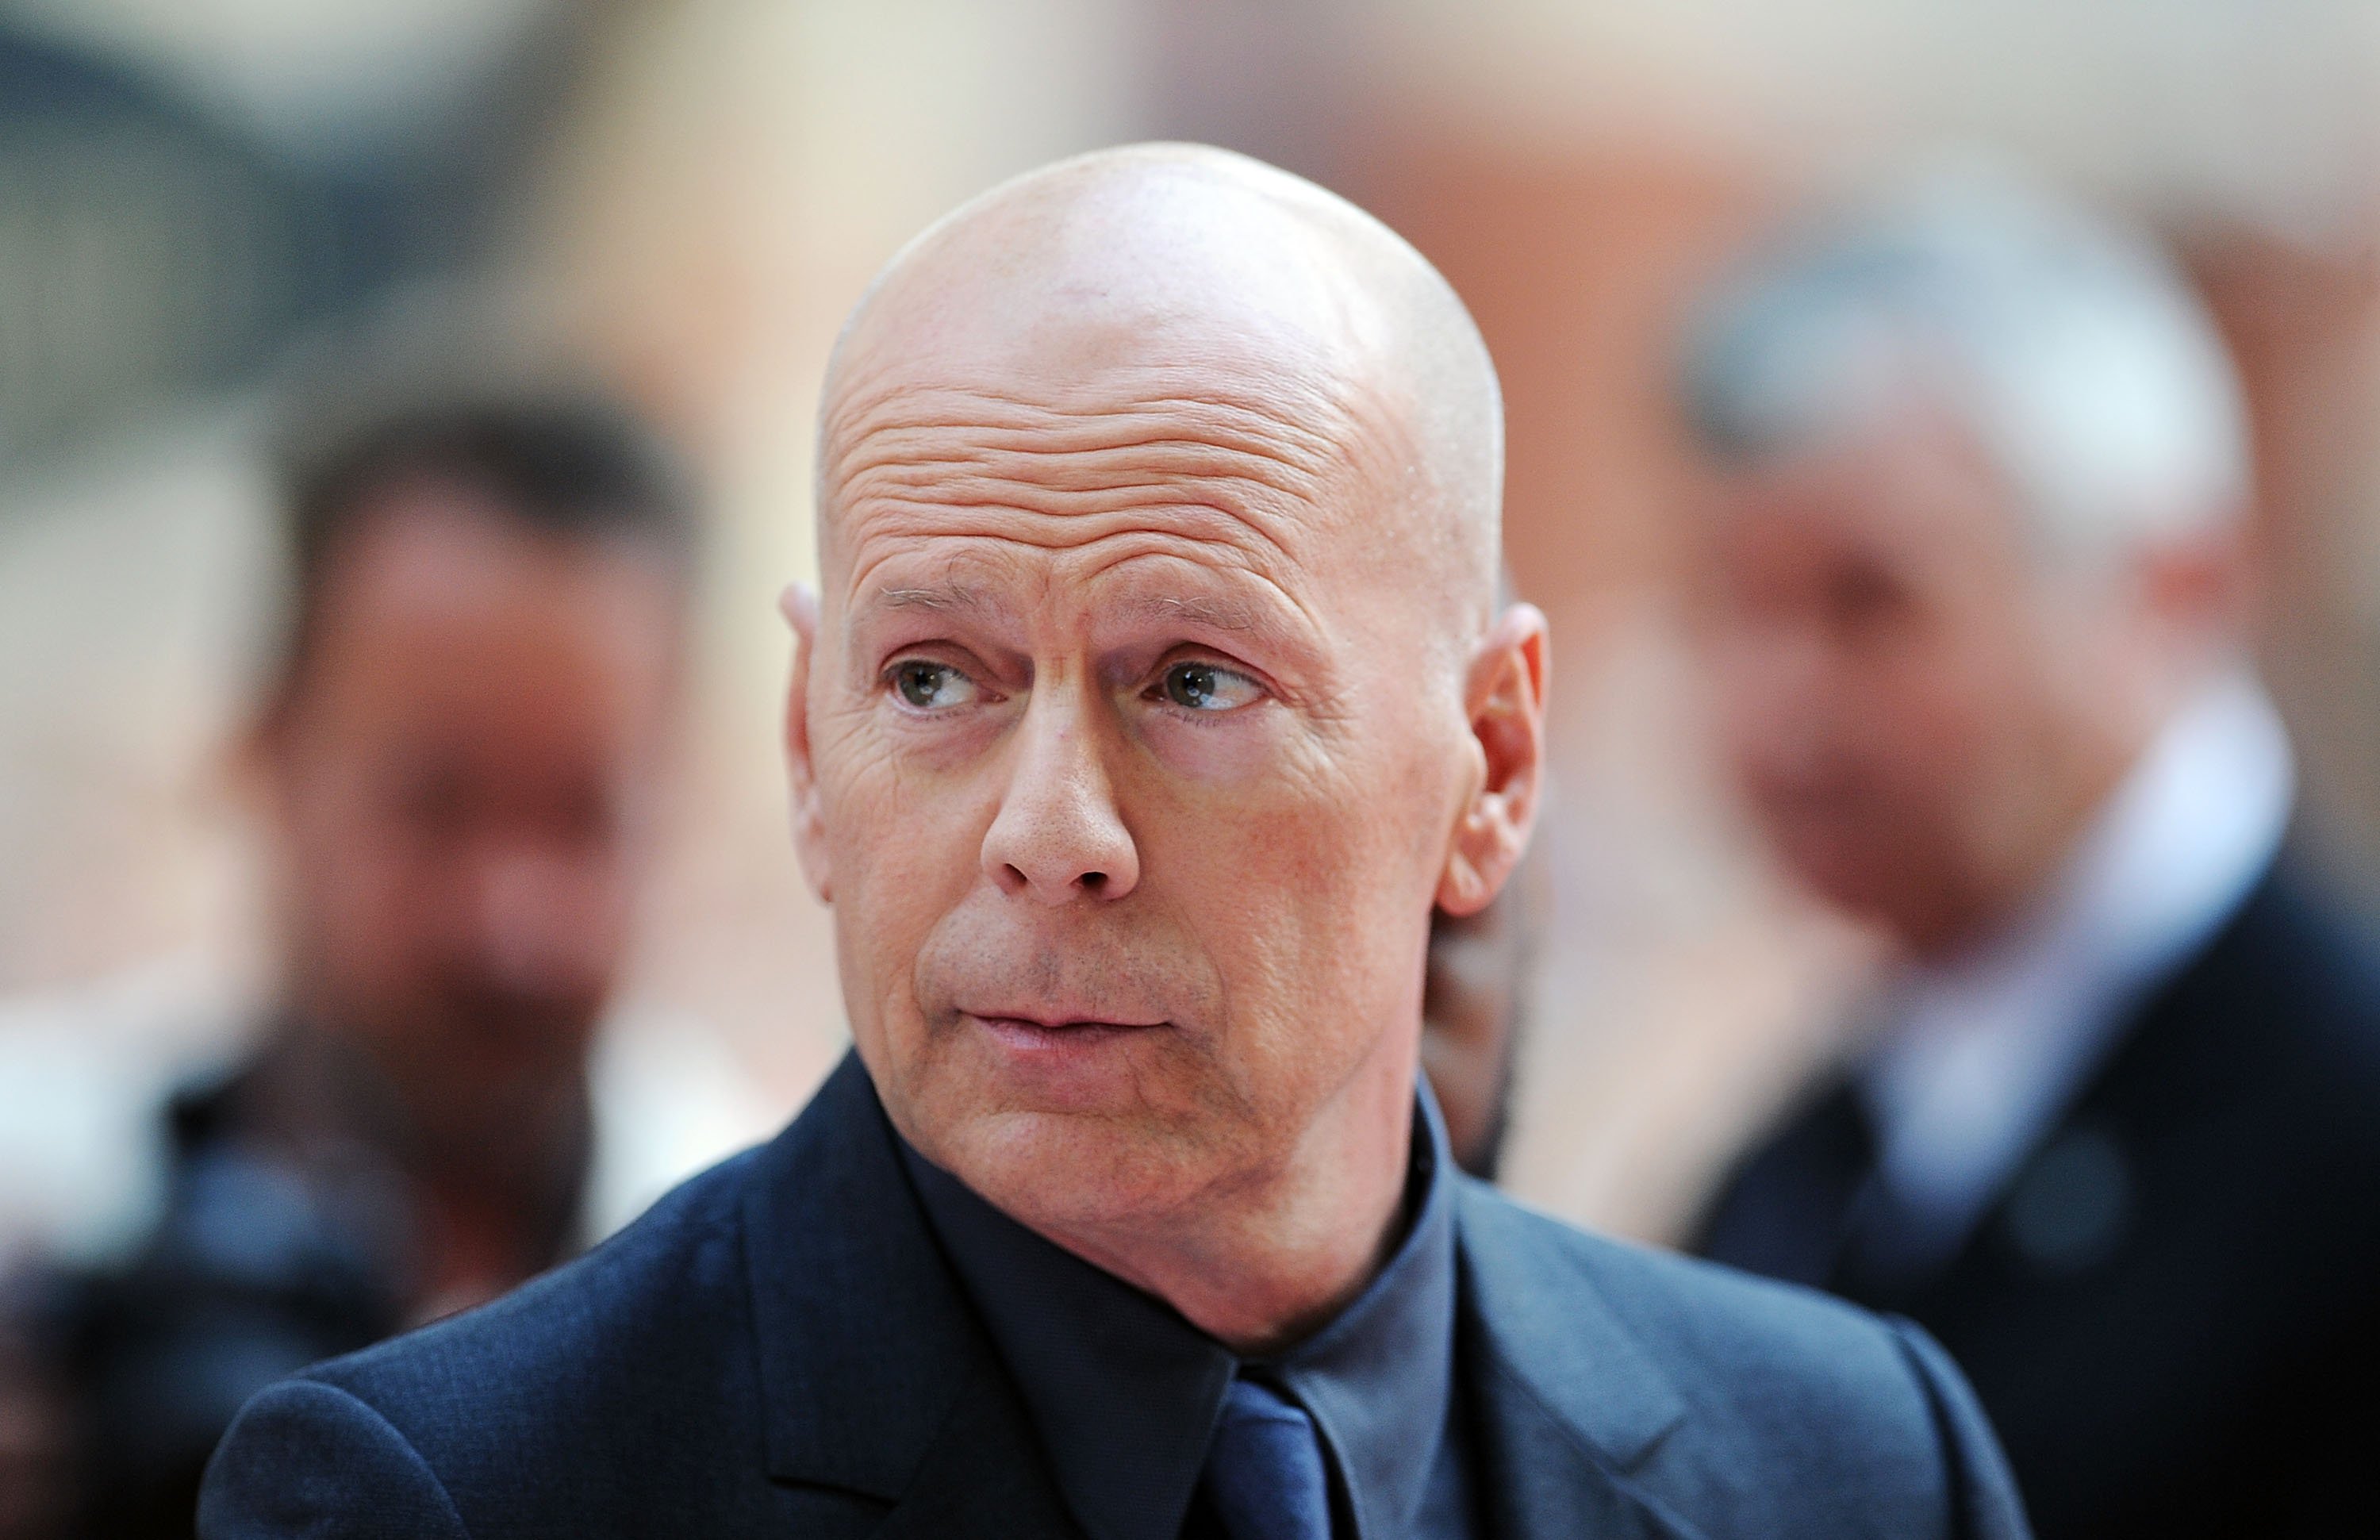 Bruce Willis attends the European Premiere of 'Red 2' at Empire Leicester Square on July 22, 2013 | Photo: Getty Images